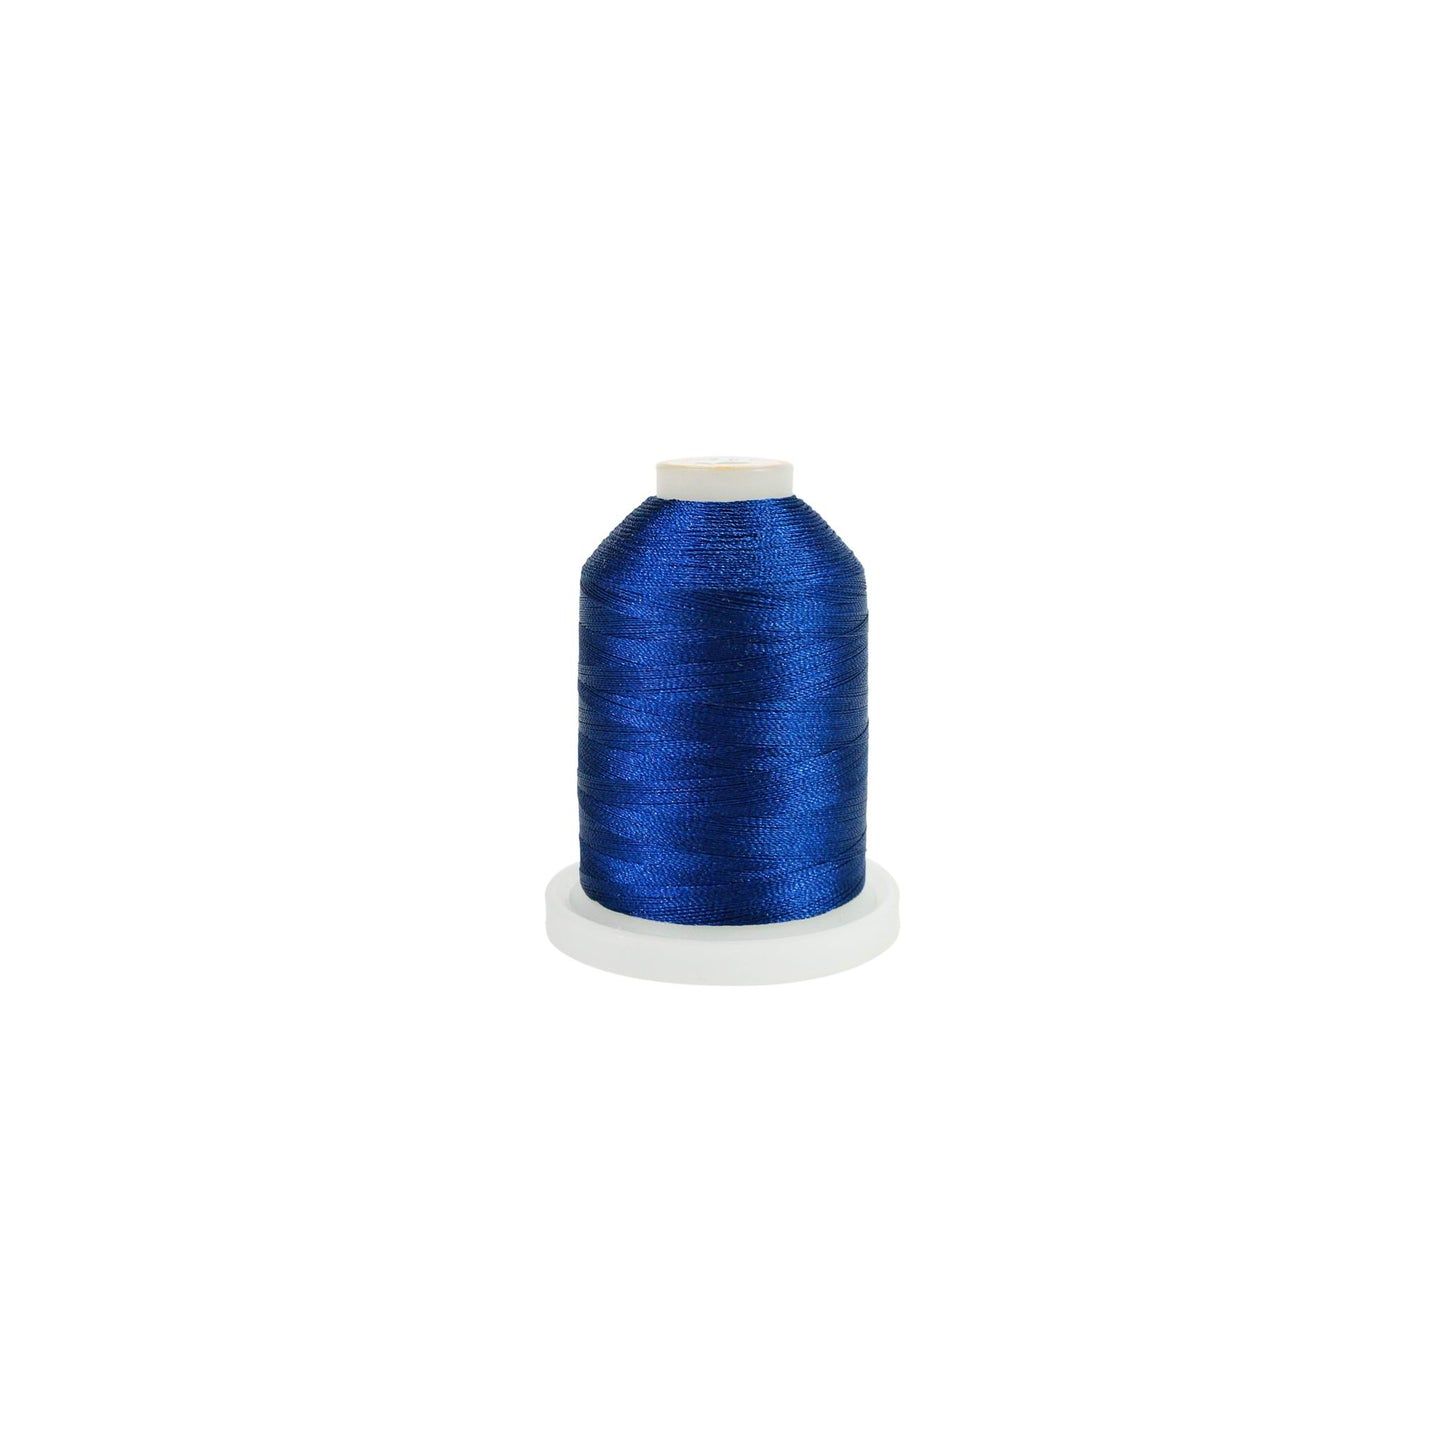 New brothread Single Spool 1000M Each Polyester Embroidery Machine Thread 40WT - 63 Colors